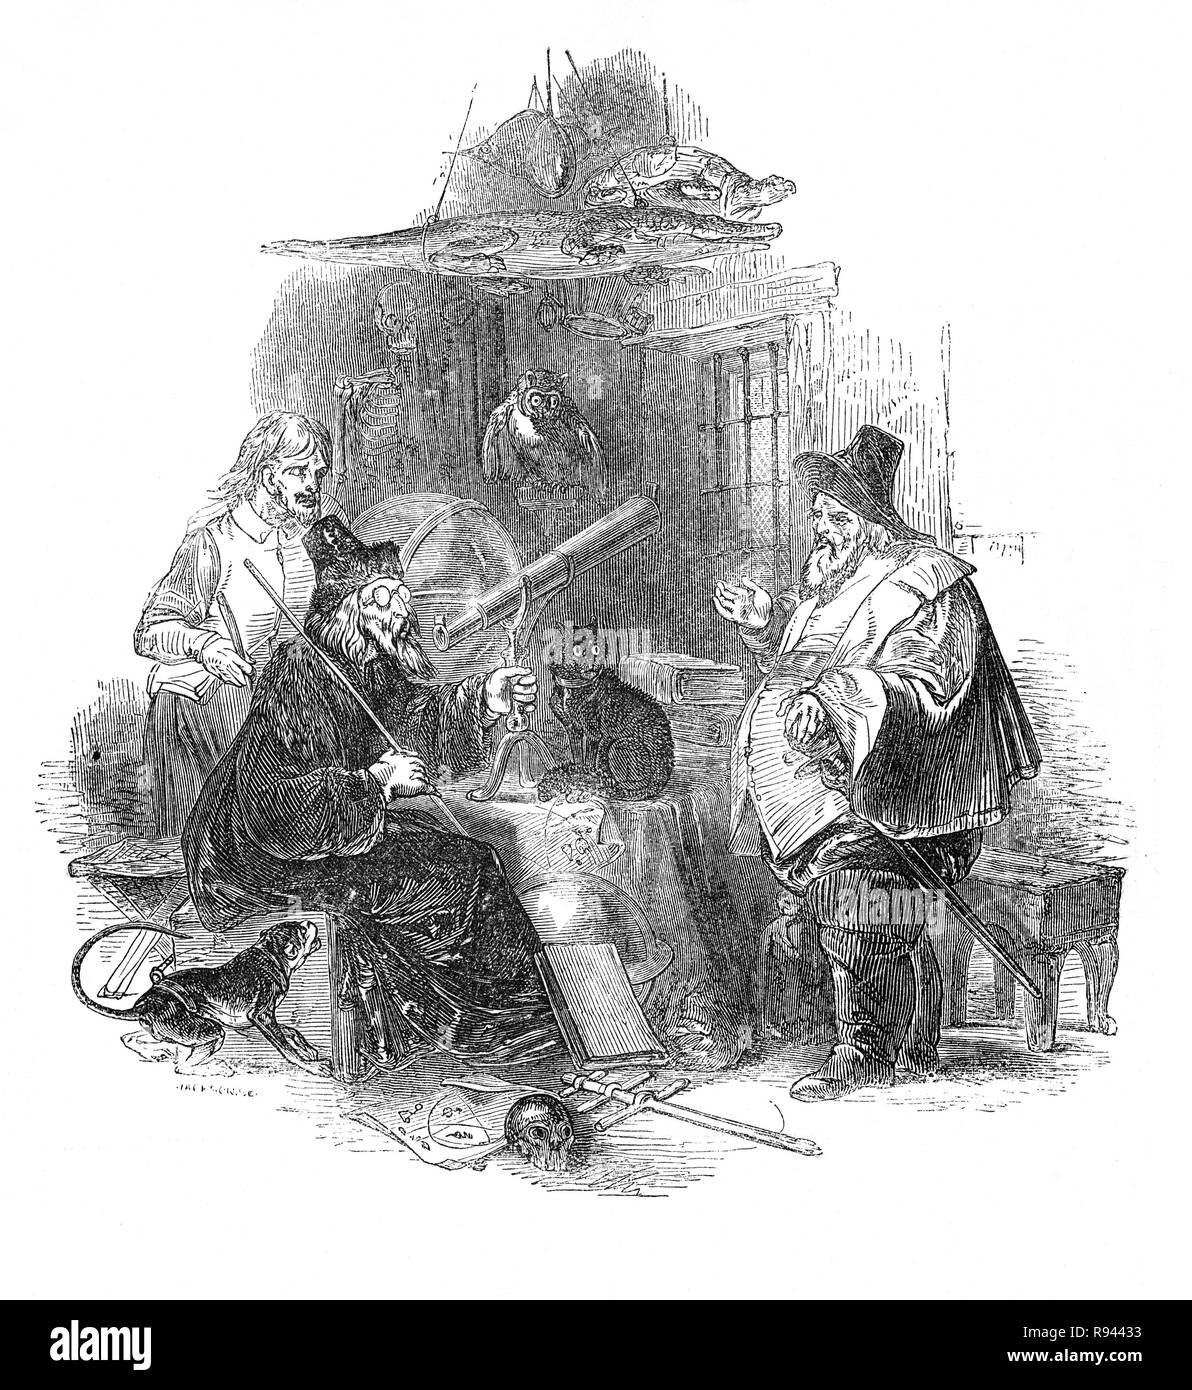 A scene from Hudibras, an English satirical polemic written by Samuel Butler(1613 – 1680), poet and satirist, mostly against Parliamenterians,Roundheads, Puritans, Presbyterians and other factions involved in the English Civil War of 1642-1651. The epic tells the story of Sir Hudibras and his squire, Ralpho who ride forth from the knight’s home to reform what they call sins and what the rest of the world regards as mild amusement.  Sir Hudibras visiting the astrologer, Sidrophel, to ask him how he should woo the widow. Stock Photo